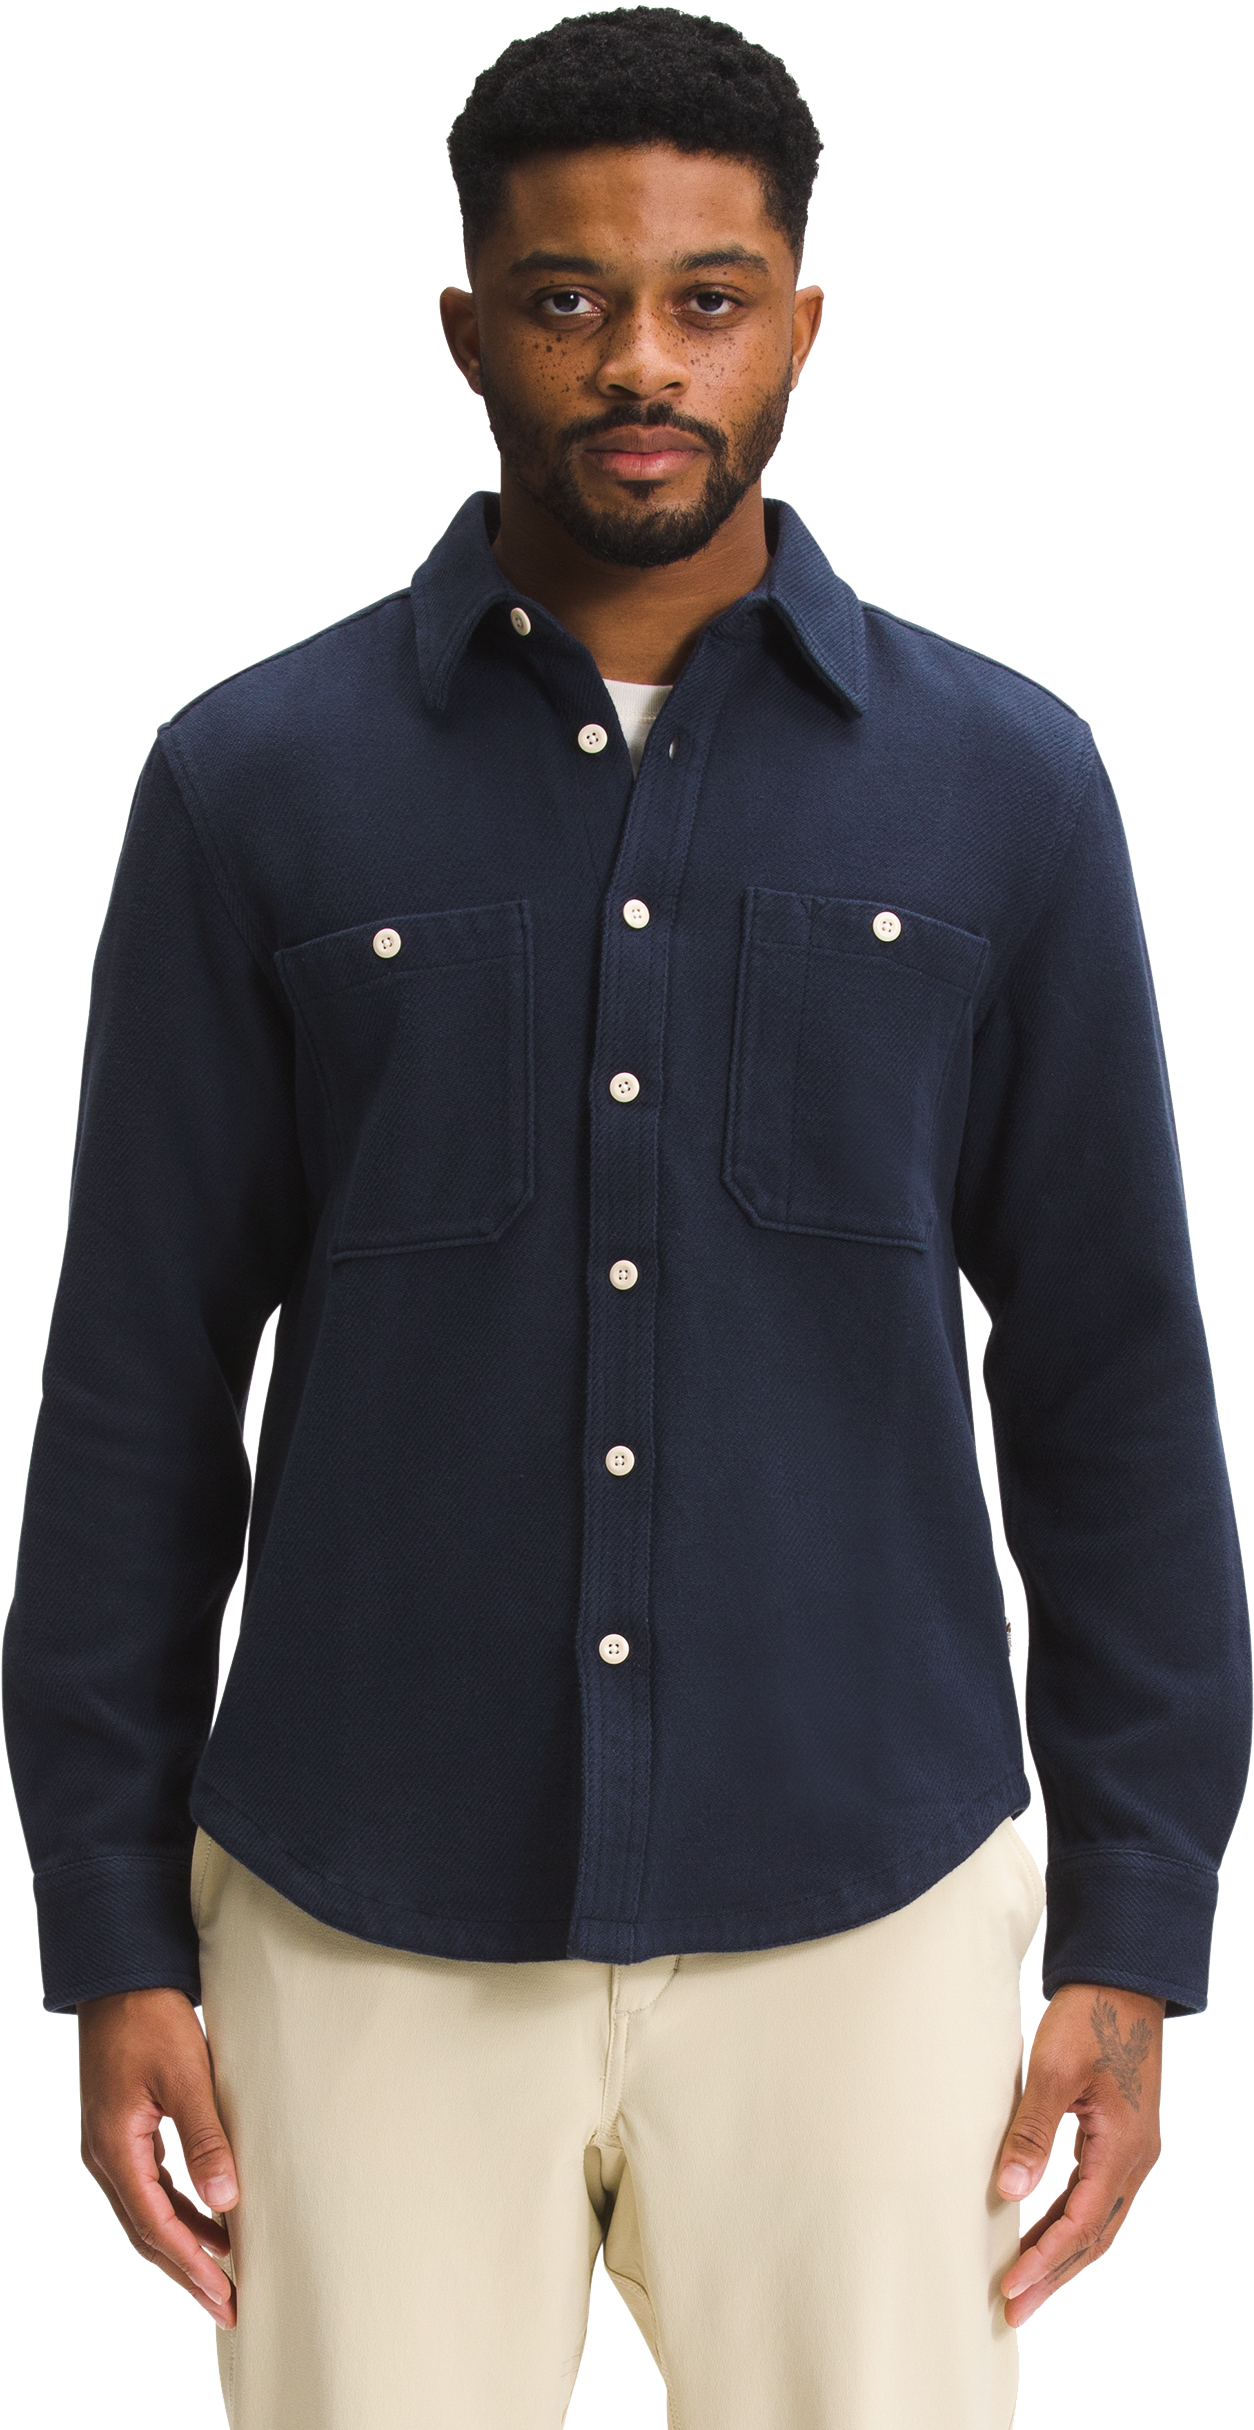 The North Face Valley Twill Flannel Long-Sleeve Shirt for Men - Aviator Navy - L